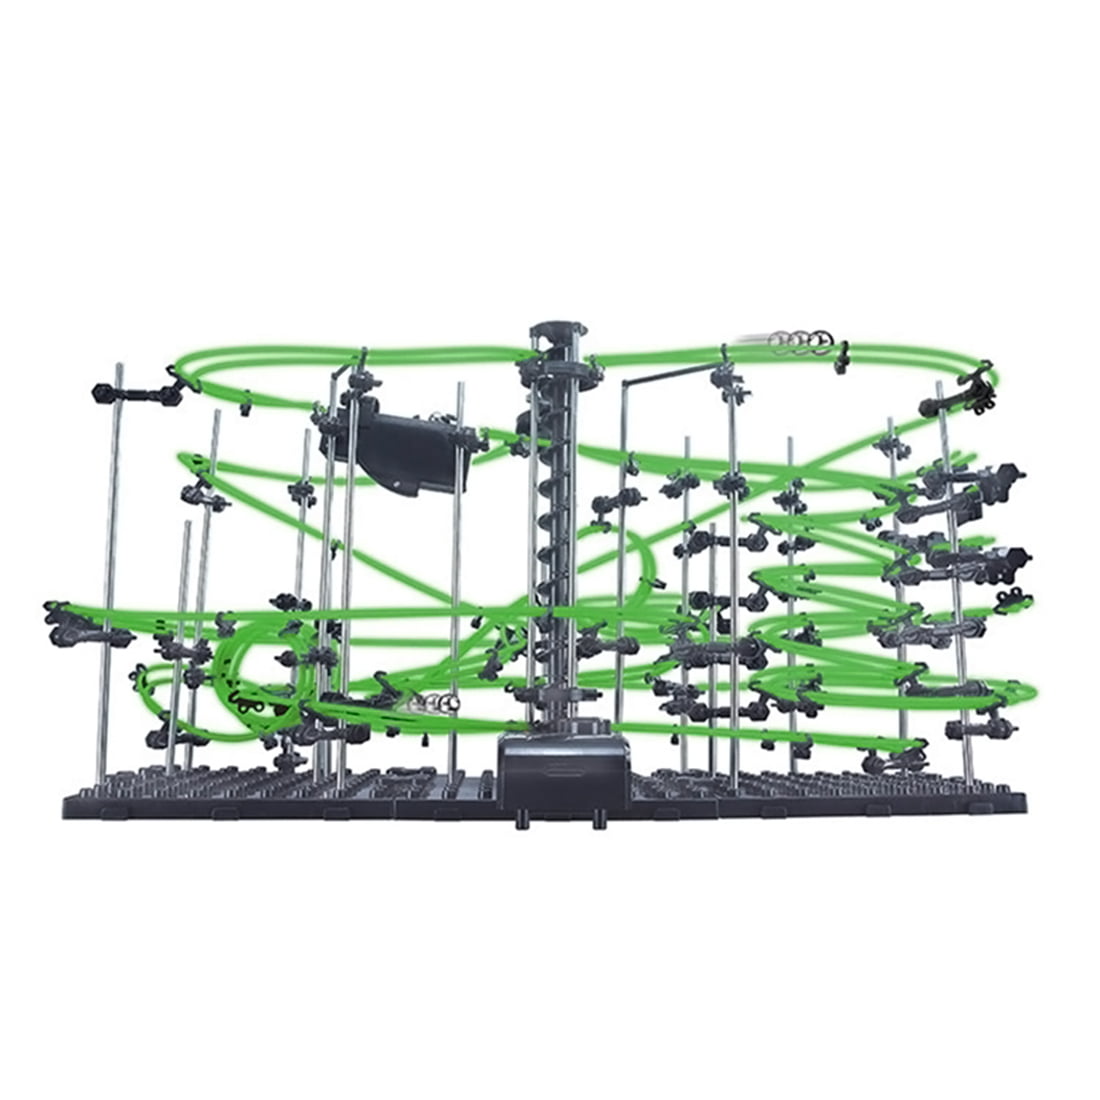 Space Rail Coaster Level 4 Glow In the Dark Marble Run Build Kit Toy 